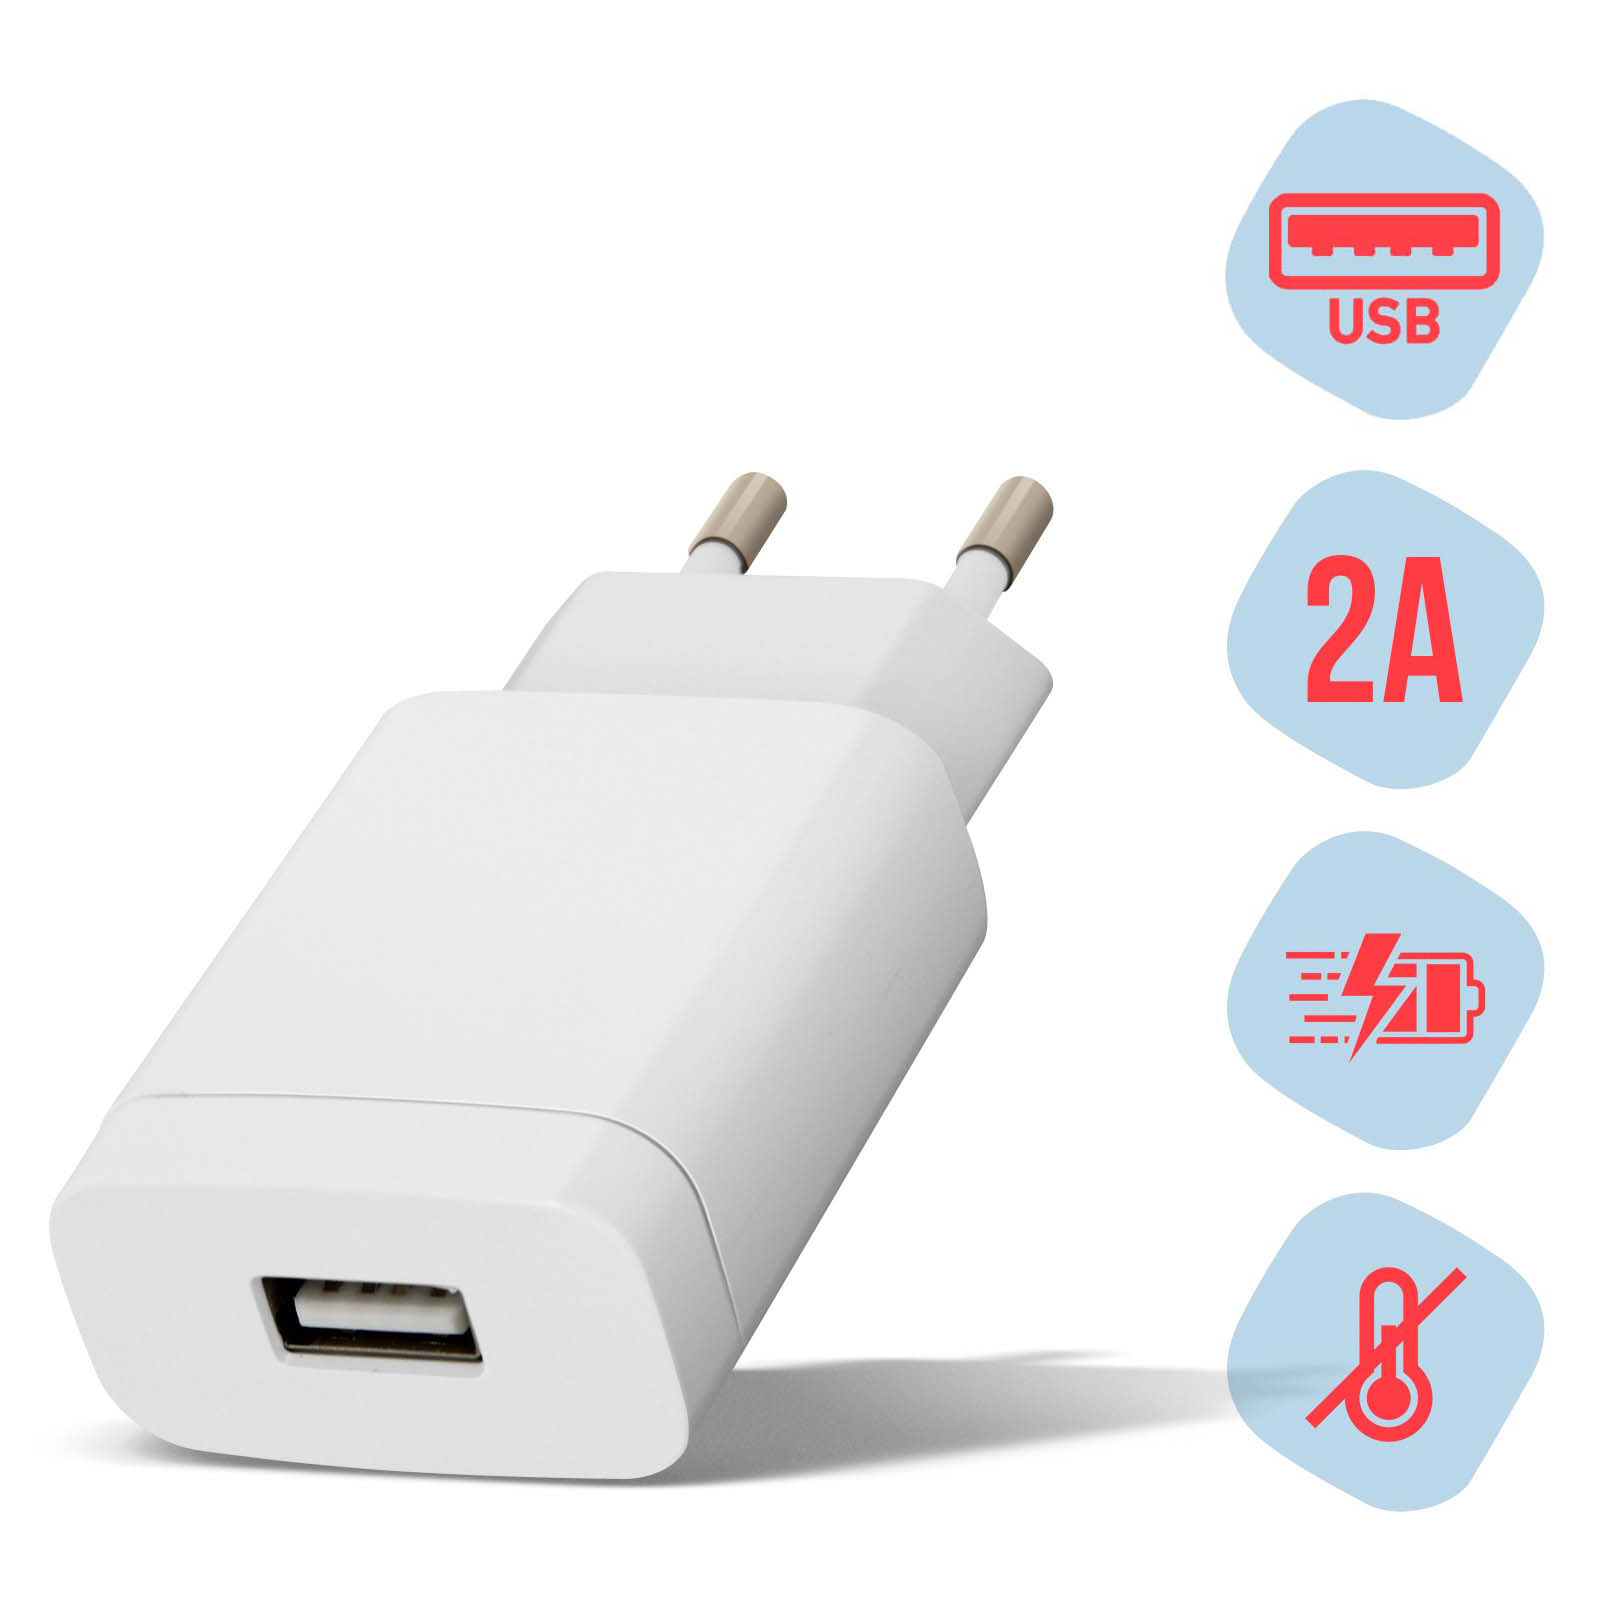 caricabatterie-2a-ricarica-veloce-spina-usb-bianco